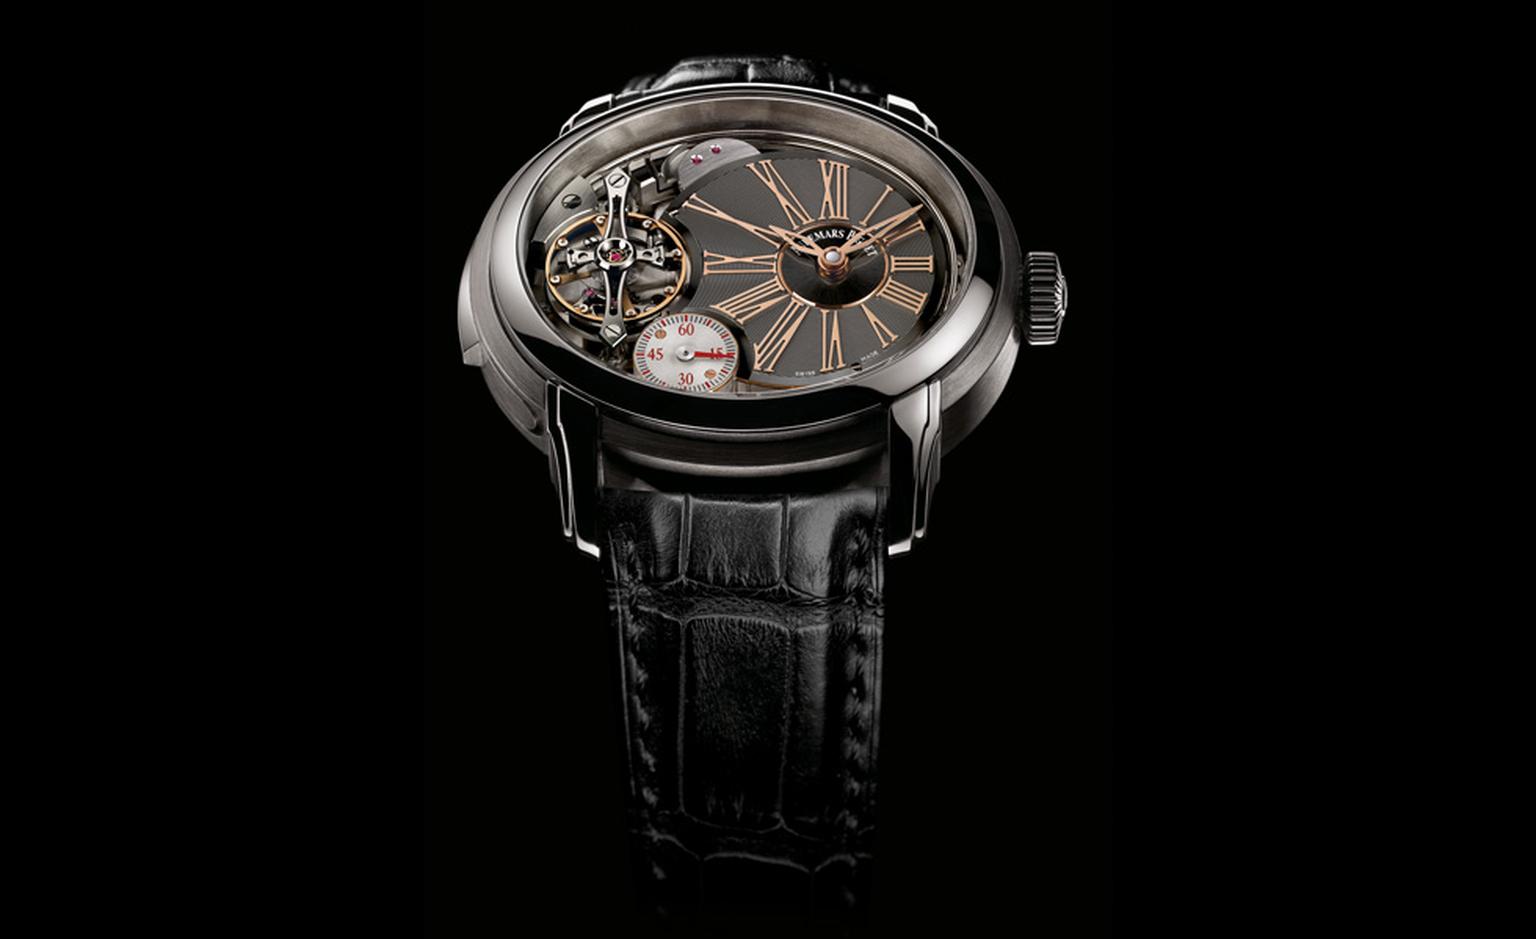 Audemars Piguet Millenary hand wound minute repeater for 2011